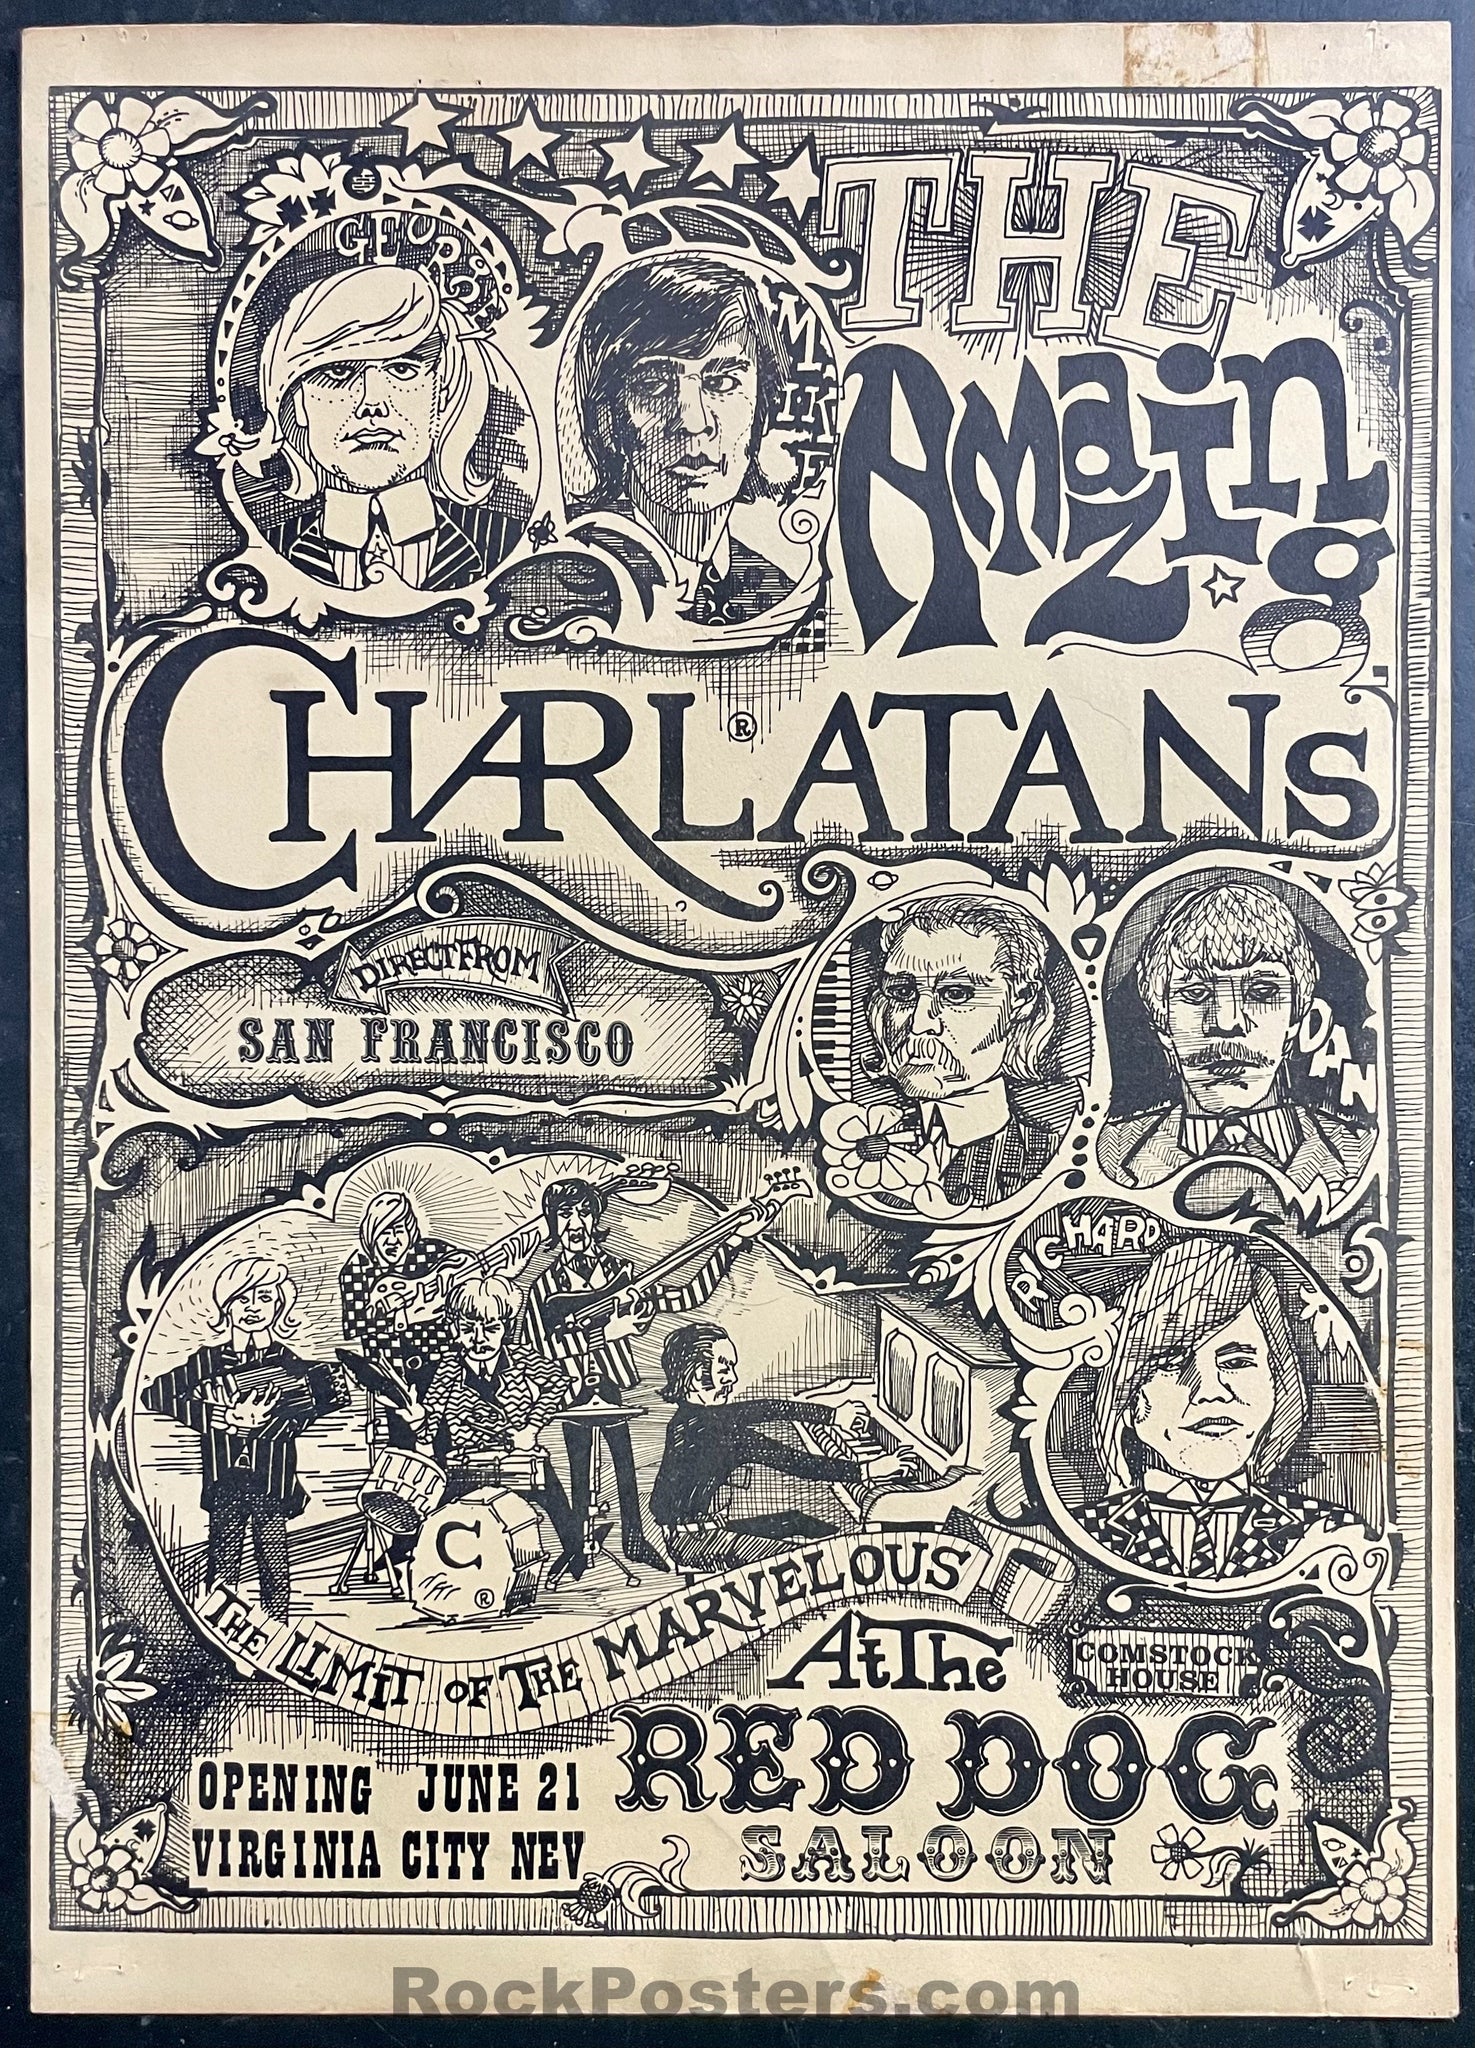 AUCTION - AOR 2.1 - "THE SEED" - Charlatans - 1965 Poster - Red Dog Saloon - Excellent